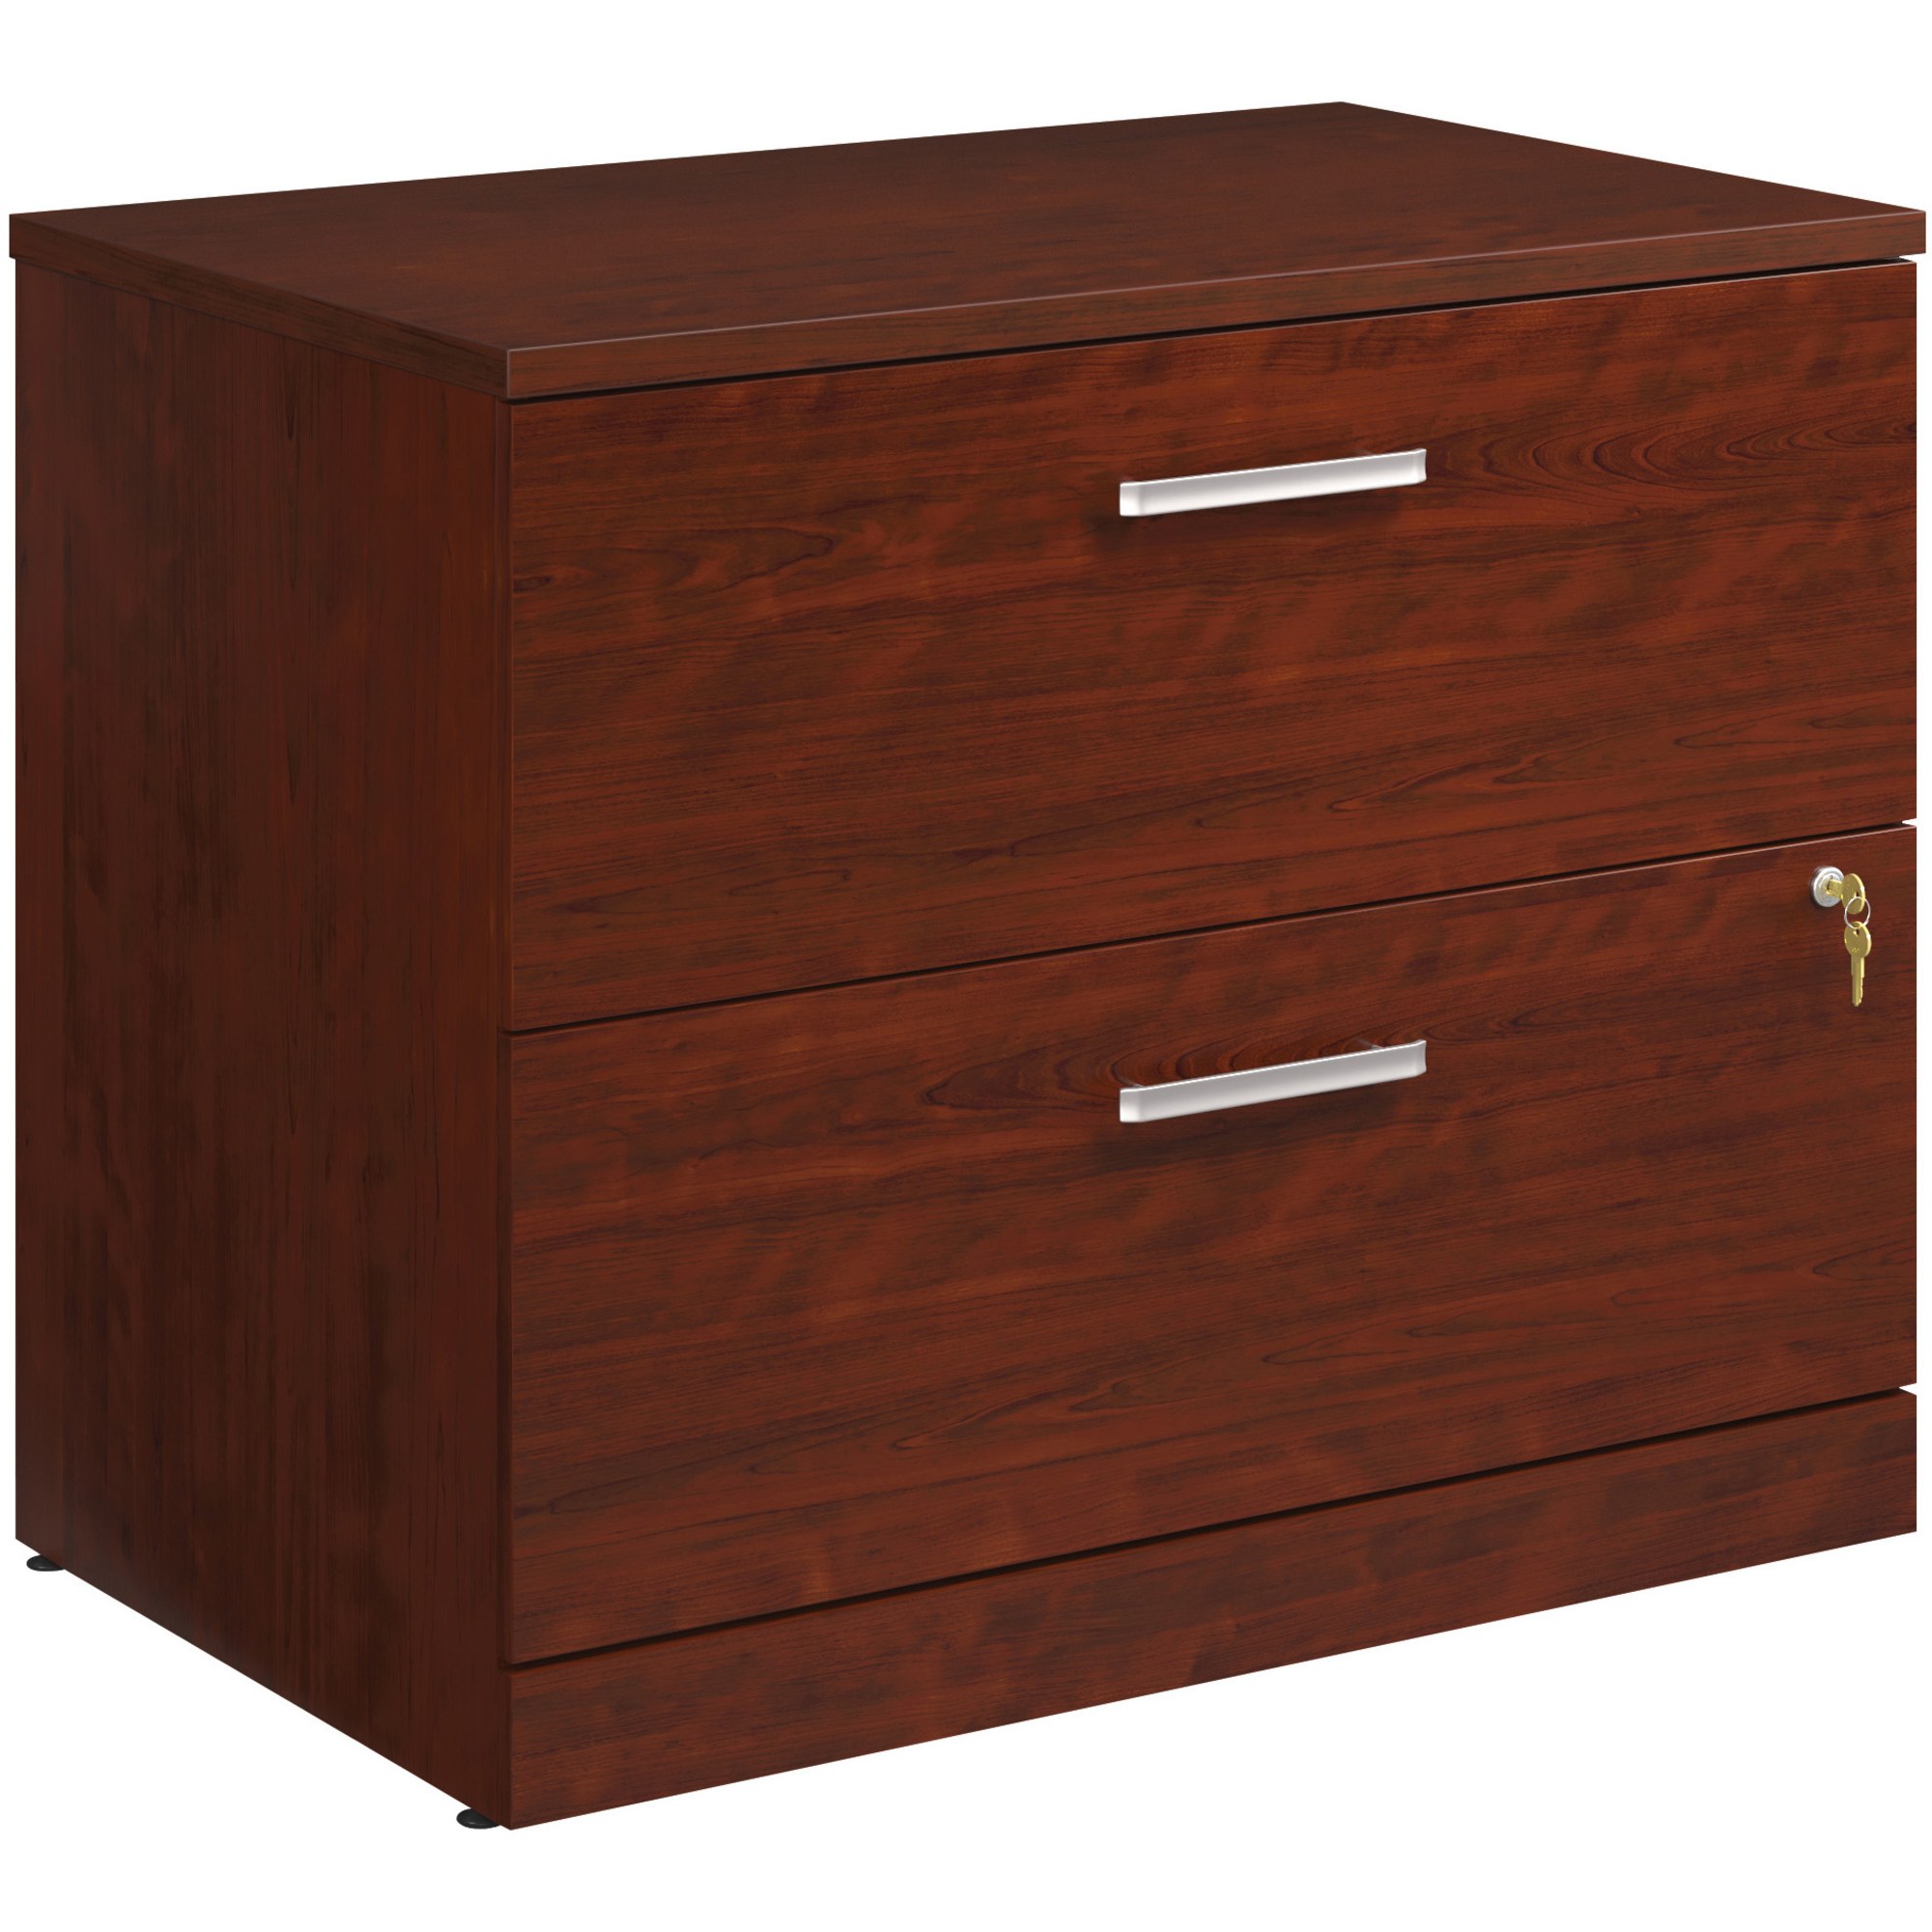 Sauder Affirm 72" x 24" Desk Shell/Lateral File/Two 3-Drawer Mobile Files Cherry - image 4 of 8